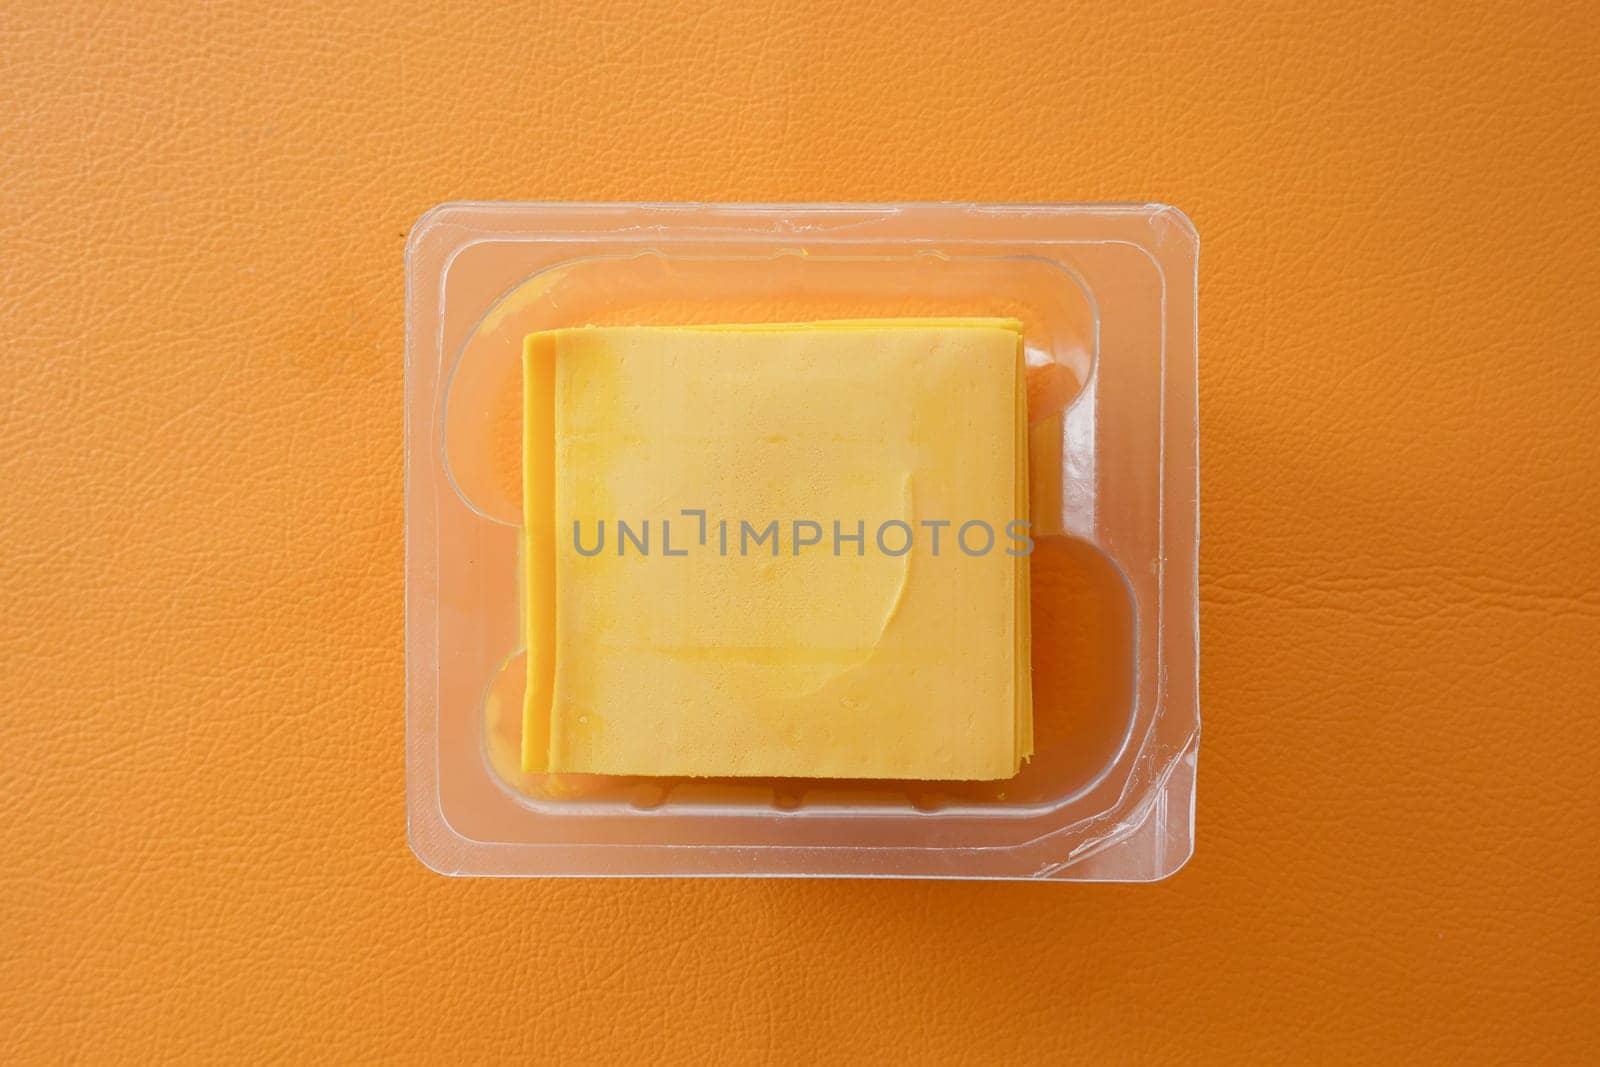 slices of cheese in the package on orange background by towfiq007